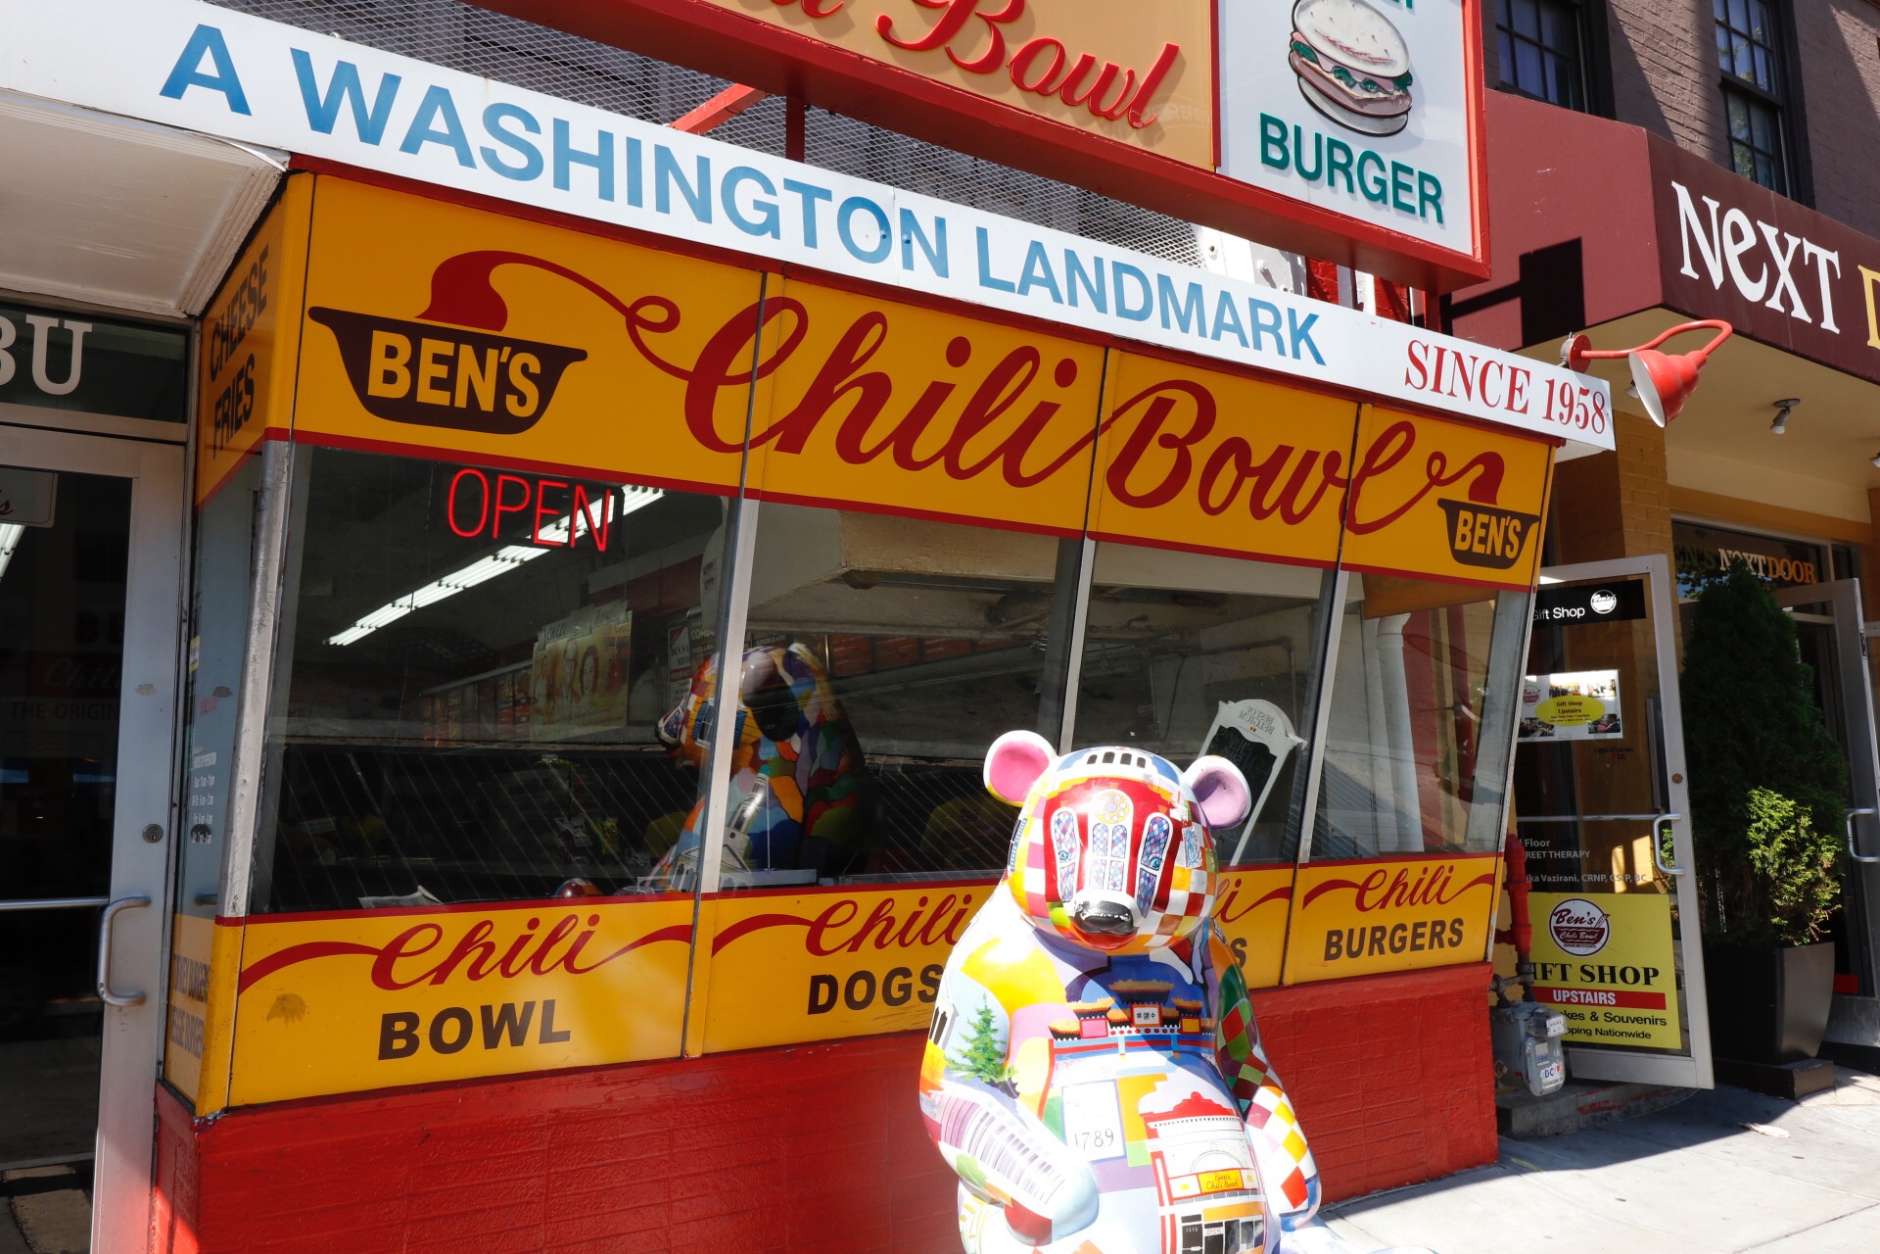 Ben's is beloved by longtime Washingtonians who treasure not only the good, cheap eats, but also the fact that the family-owned business remained rooted on U Street through challenging times. (WTOP/Kate Ryan)